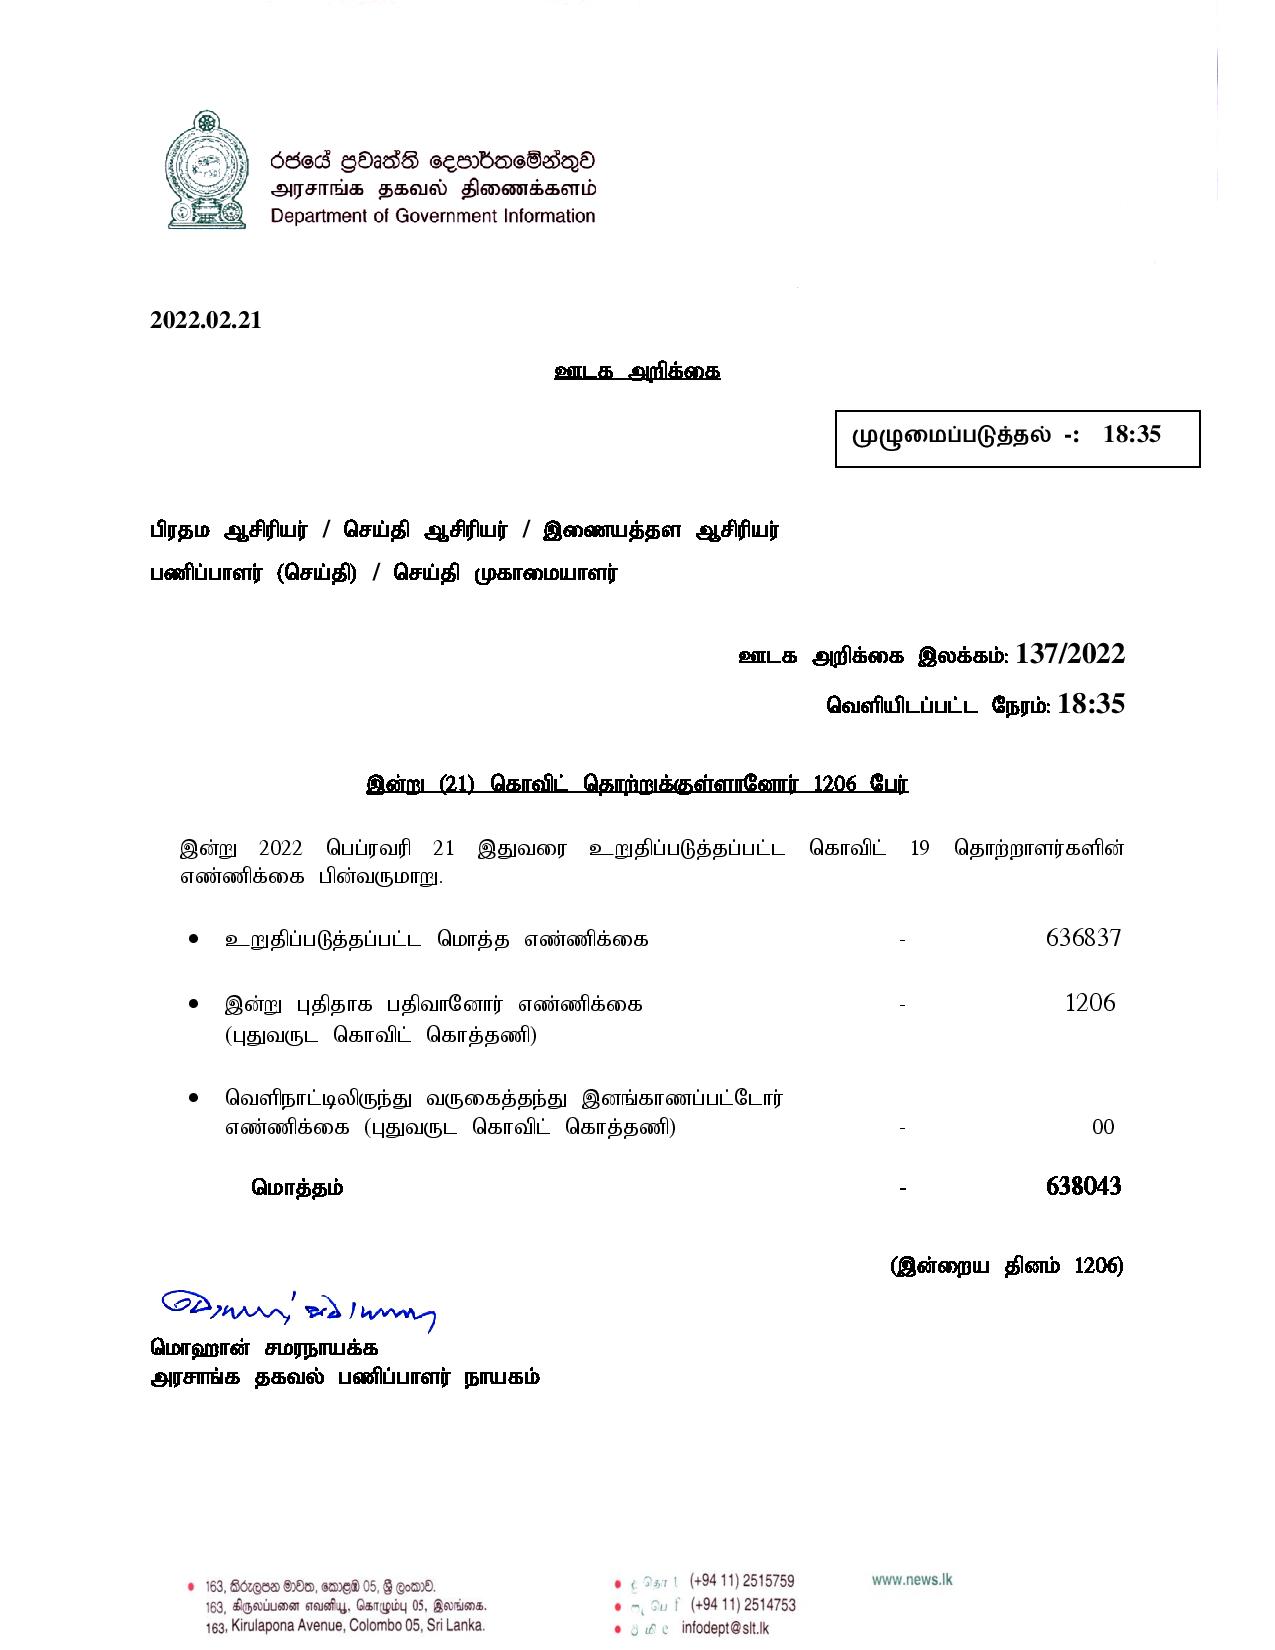 Press Release 137 Tamil page 001